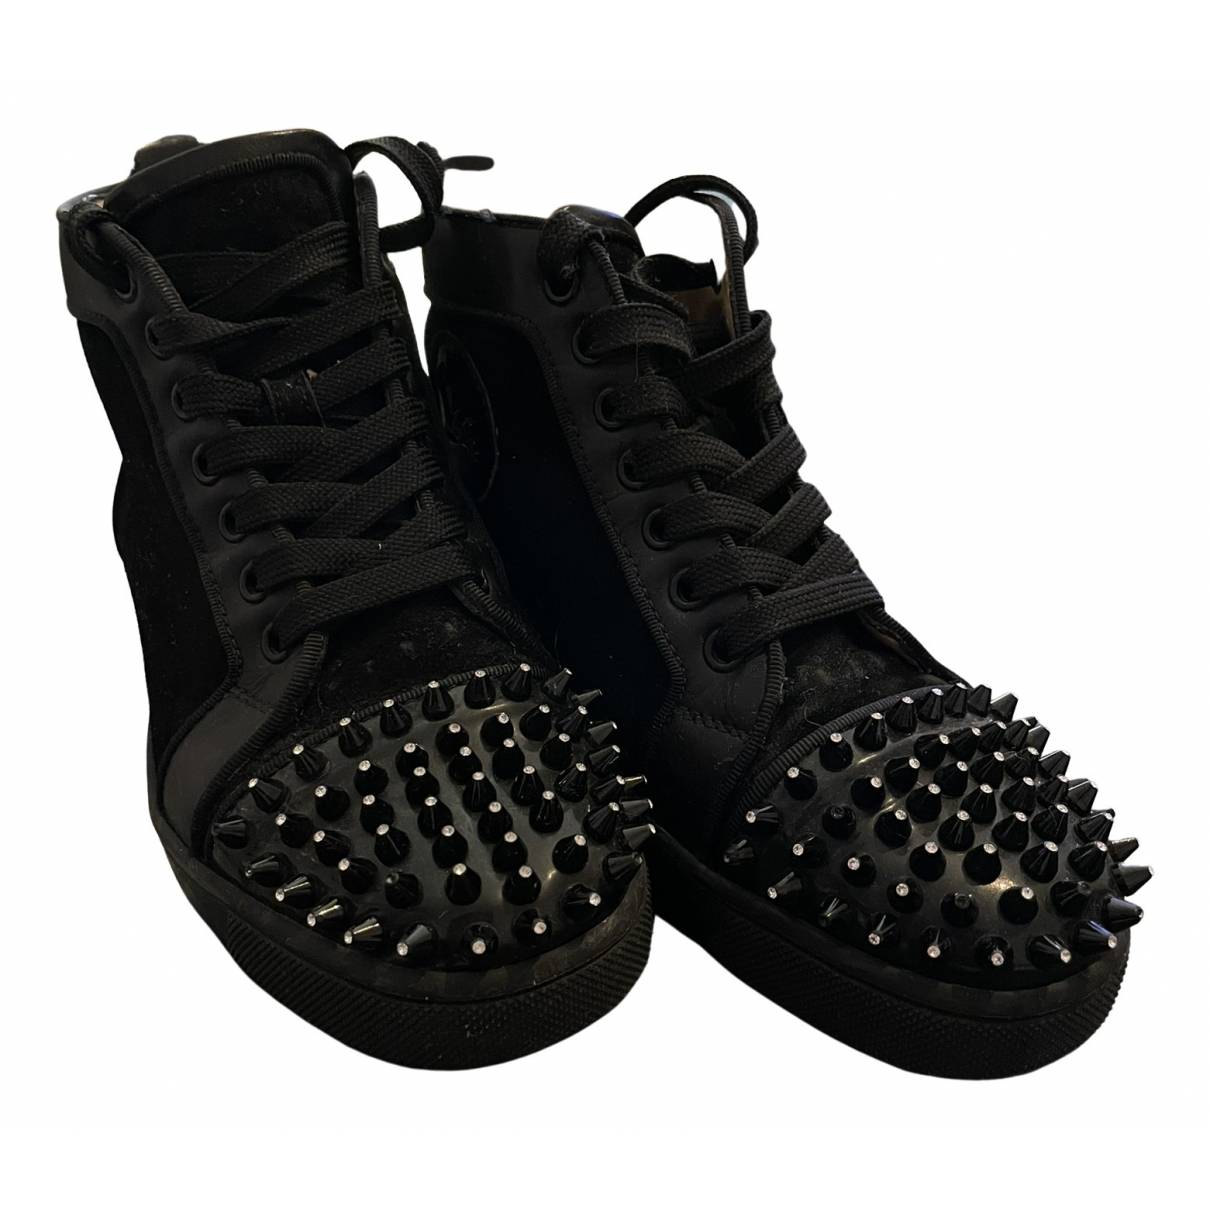 Christian Louboutin Black Leather Louis Spikes High Top Sneakers Size 41.5 Christian  Louboutin